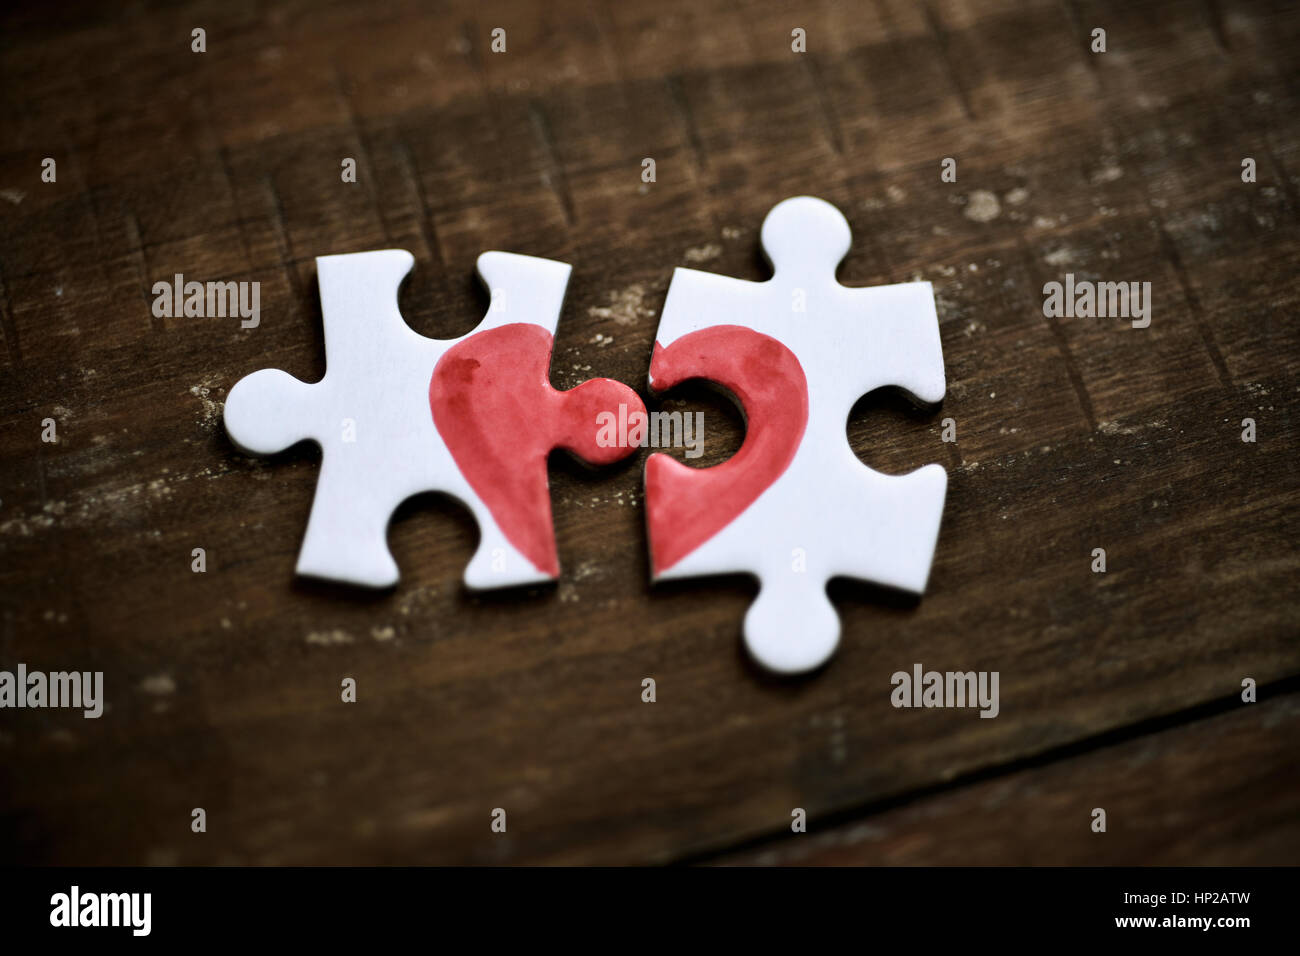 closeup of two separated pieces of a puzzle which together form a heart on a rustic wooden surface, depicting the idea of rupture or cooperation Stock Photo